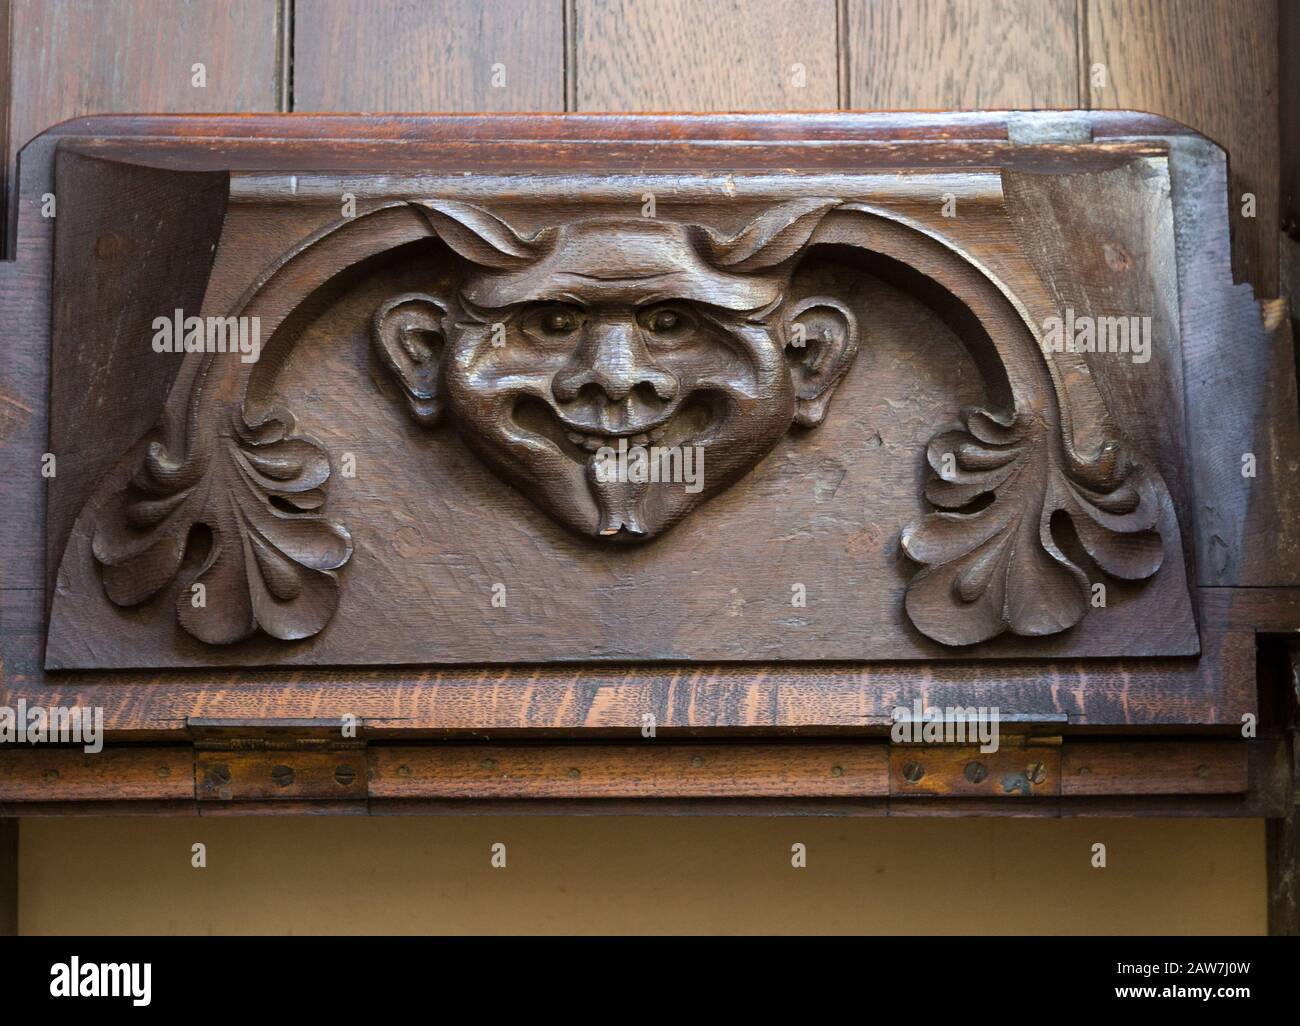 Church of Saint Mary of the Assumption, Ufford, Suffolk, England, UK grotesque devil face on misericord bench seat Stock Photo